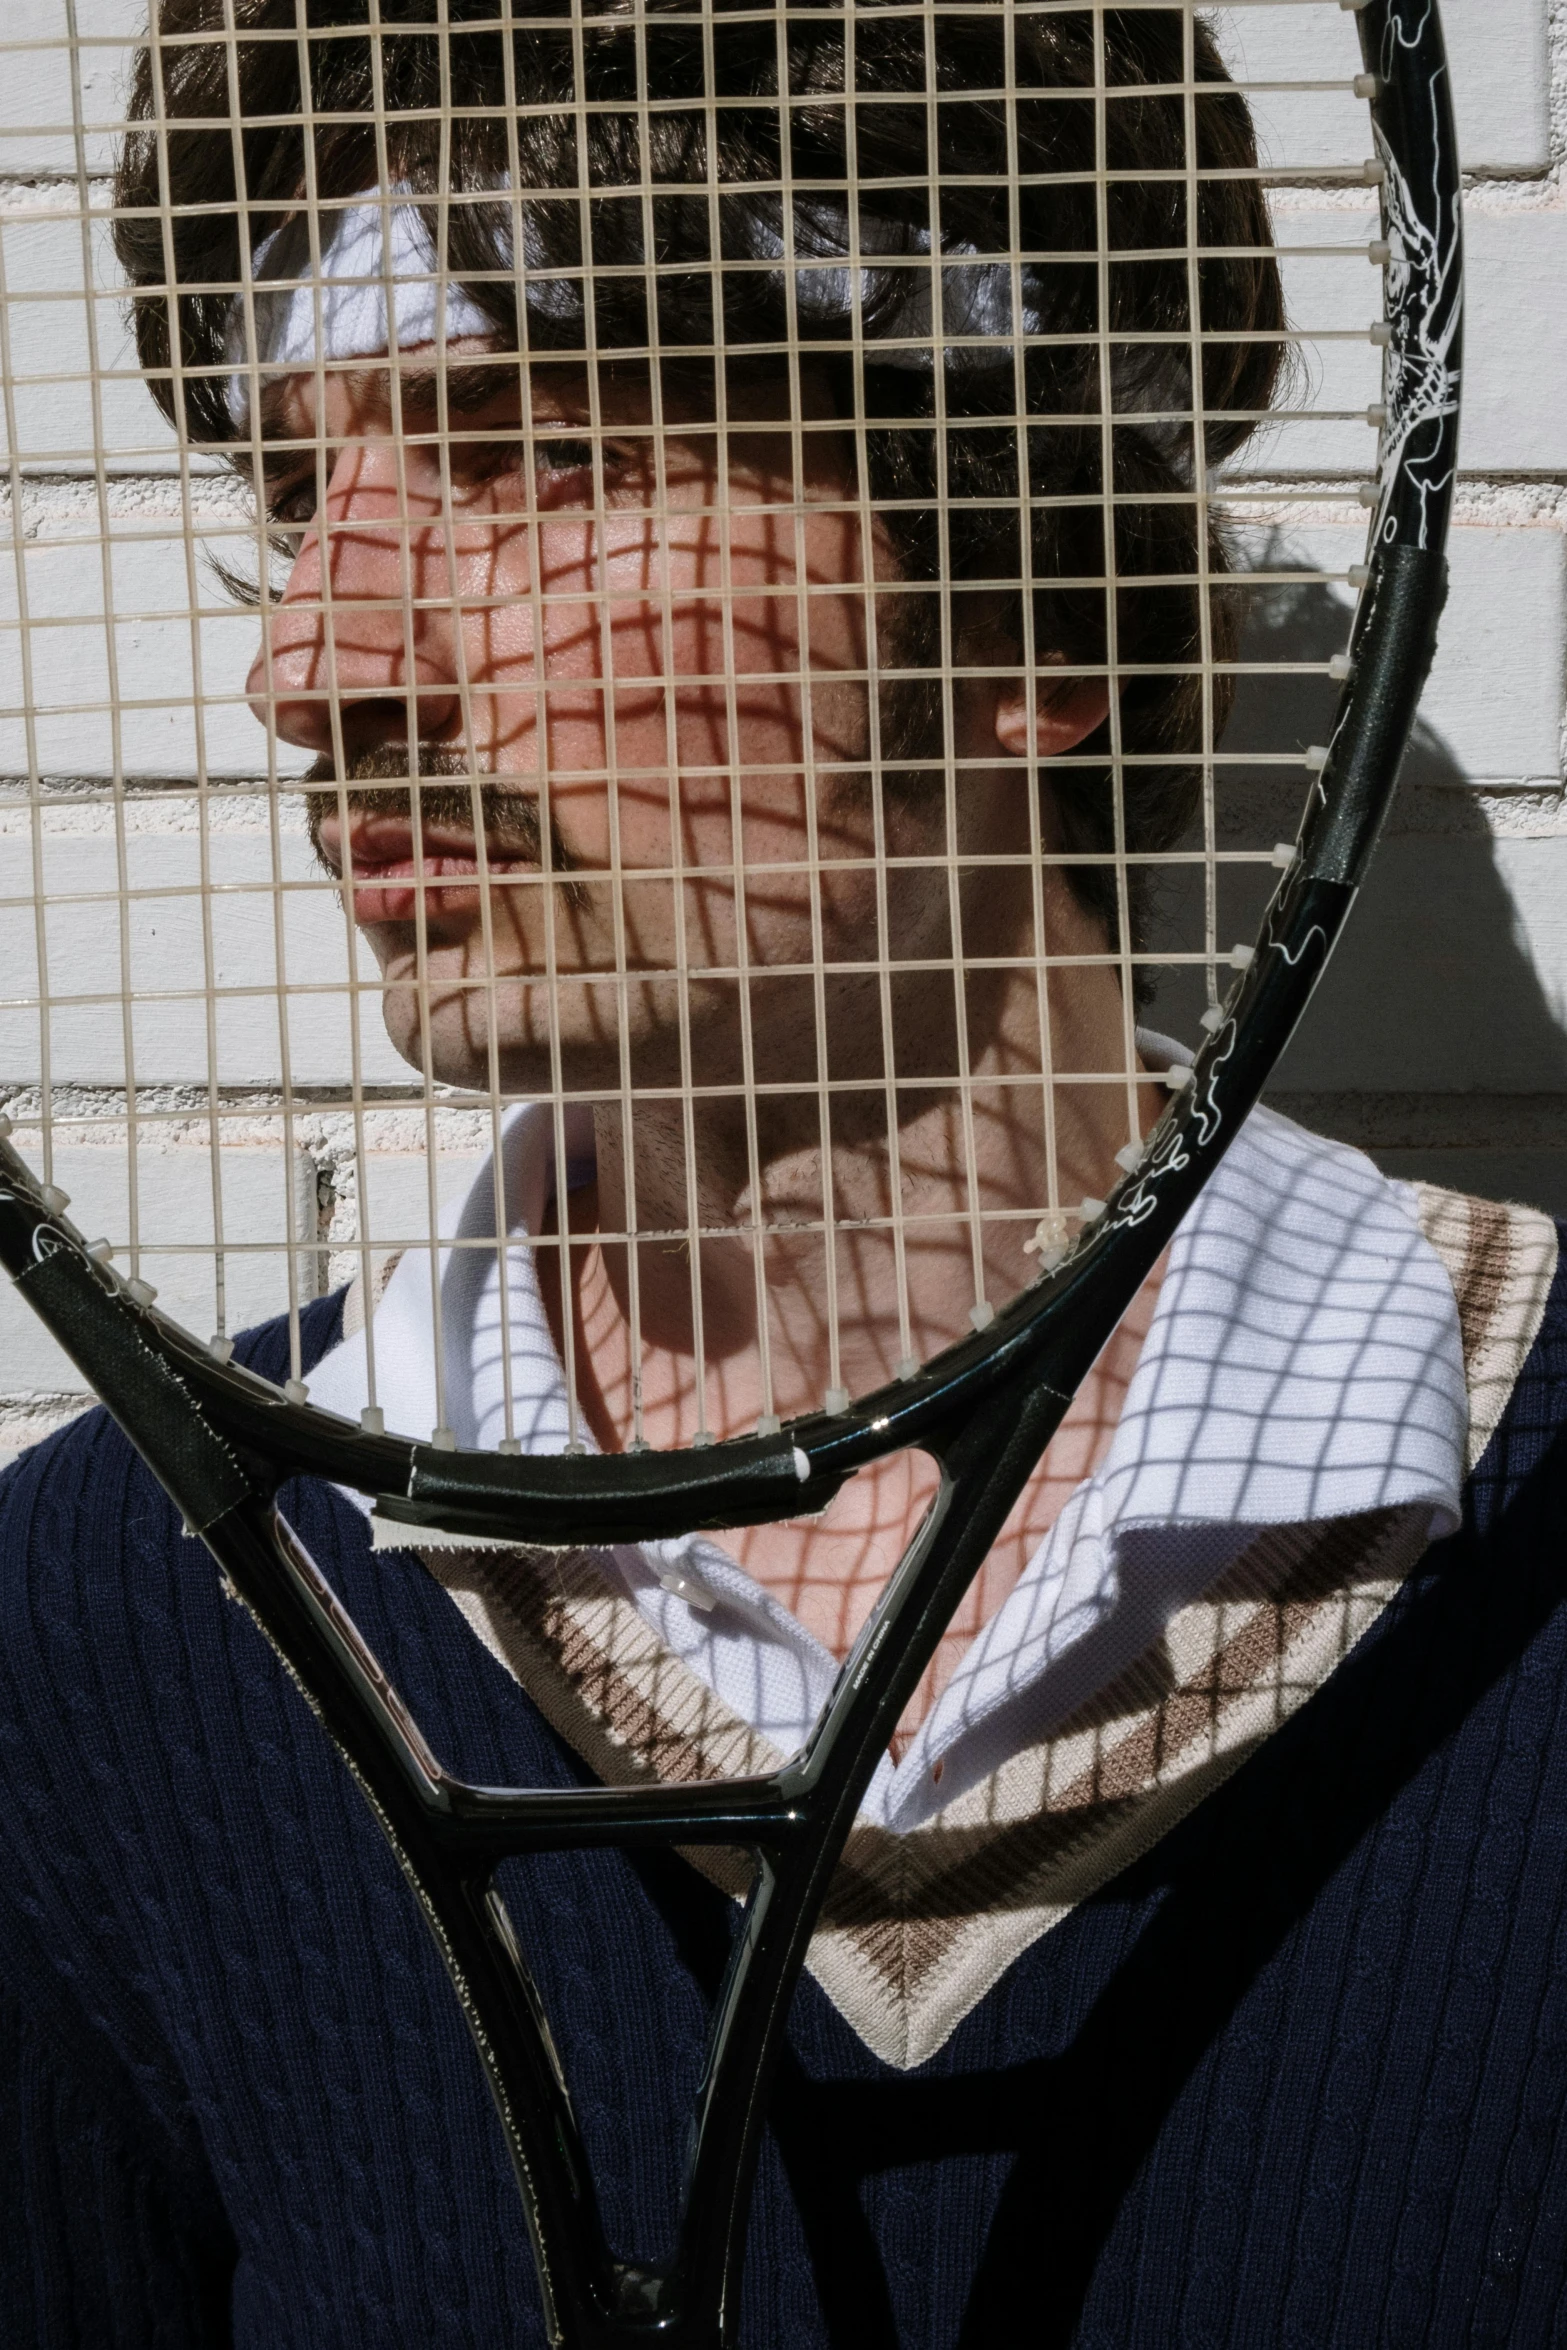 man with tennis racket looking through large cage